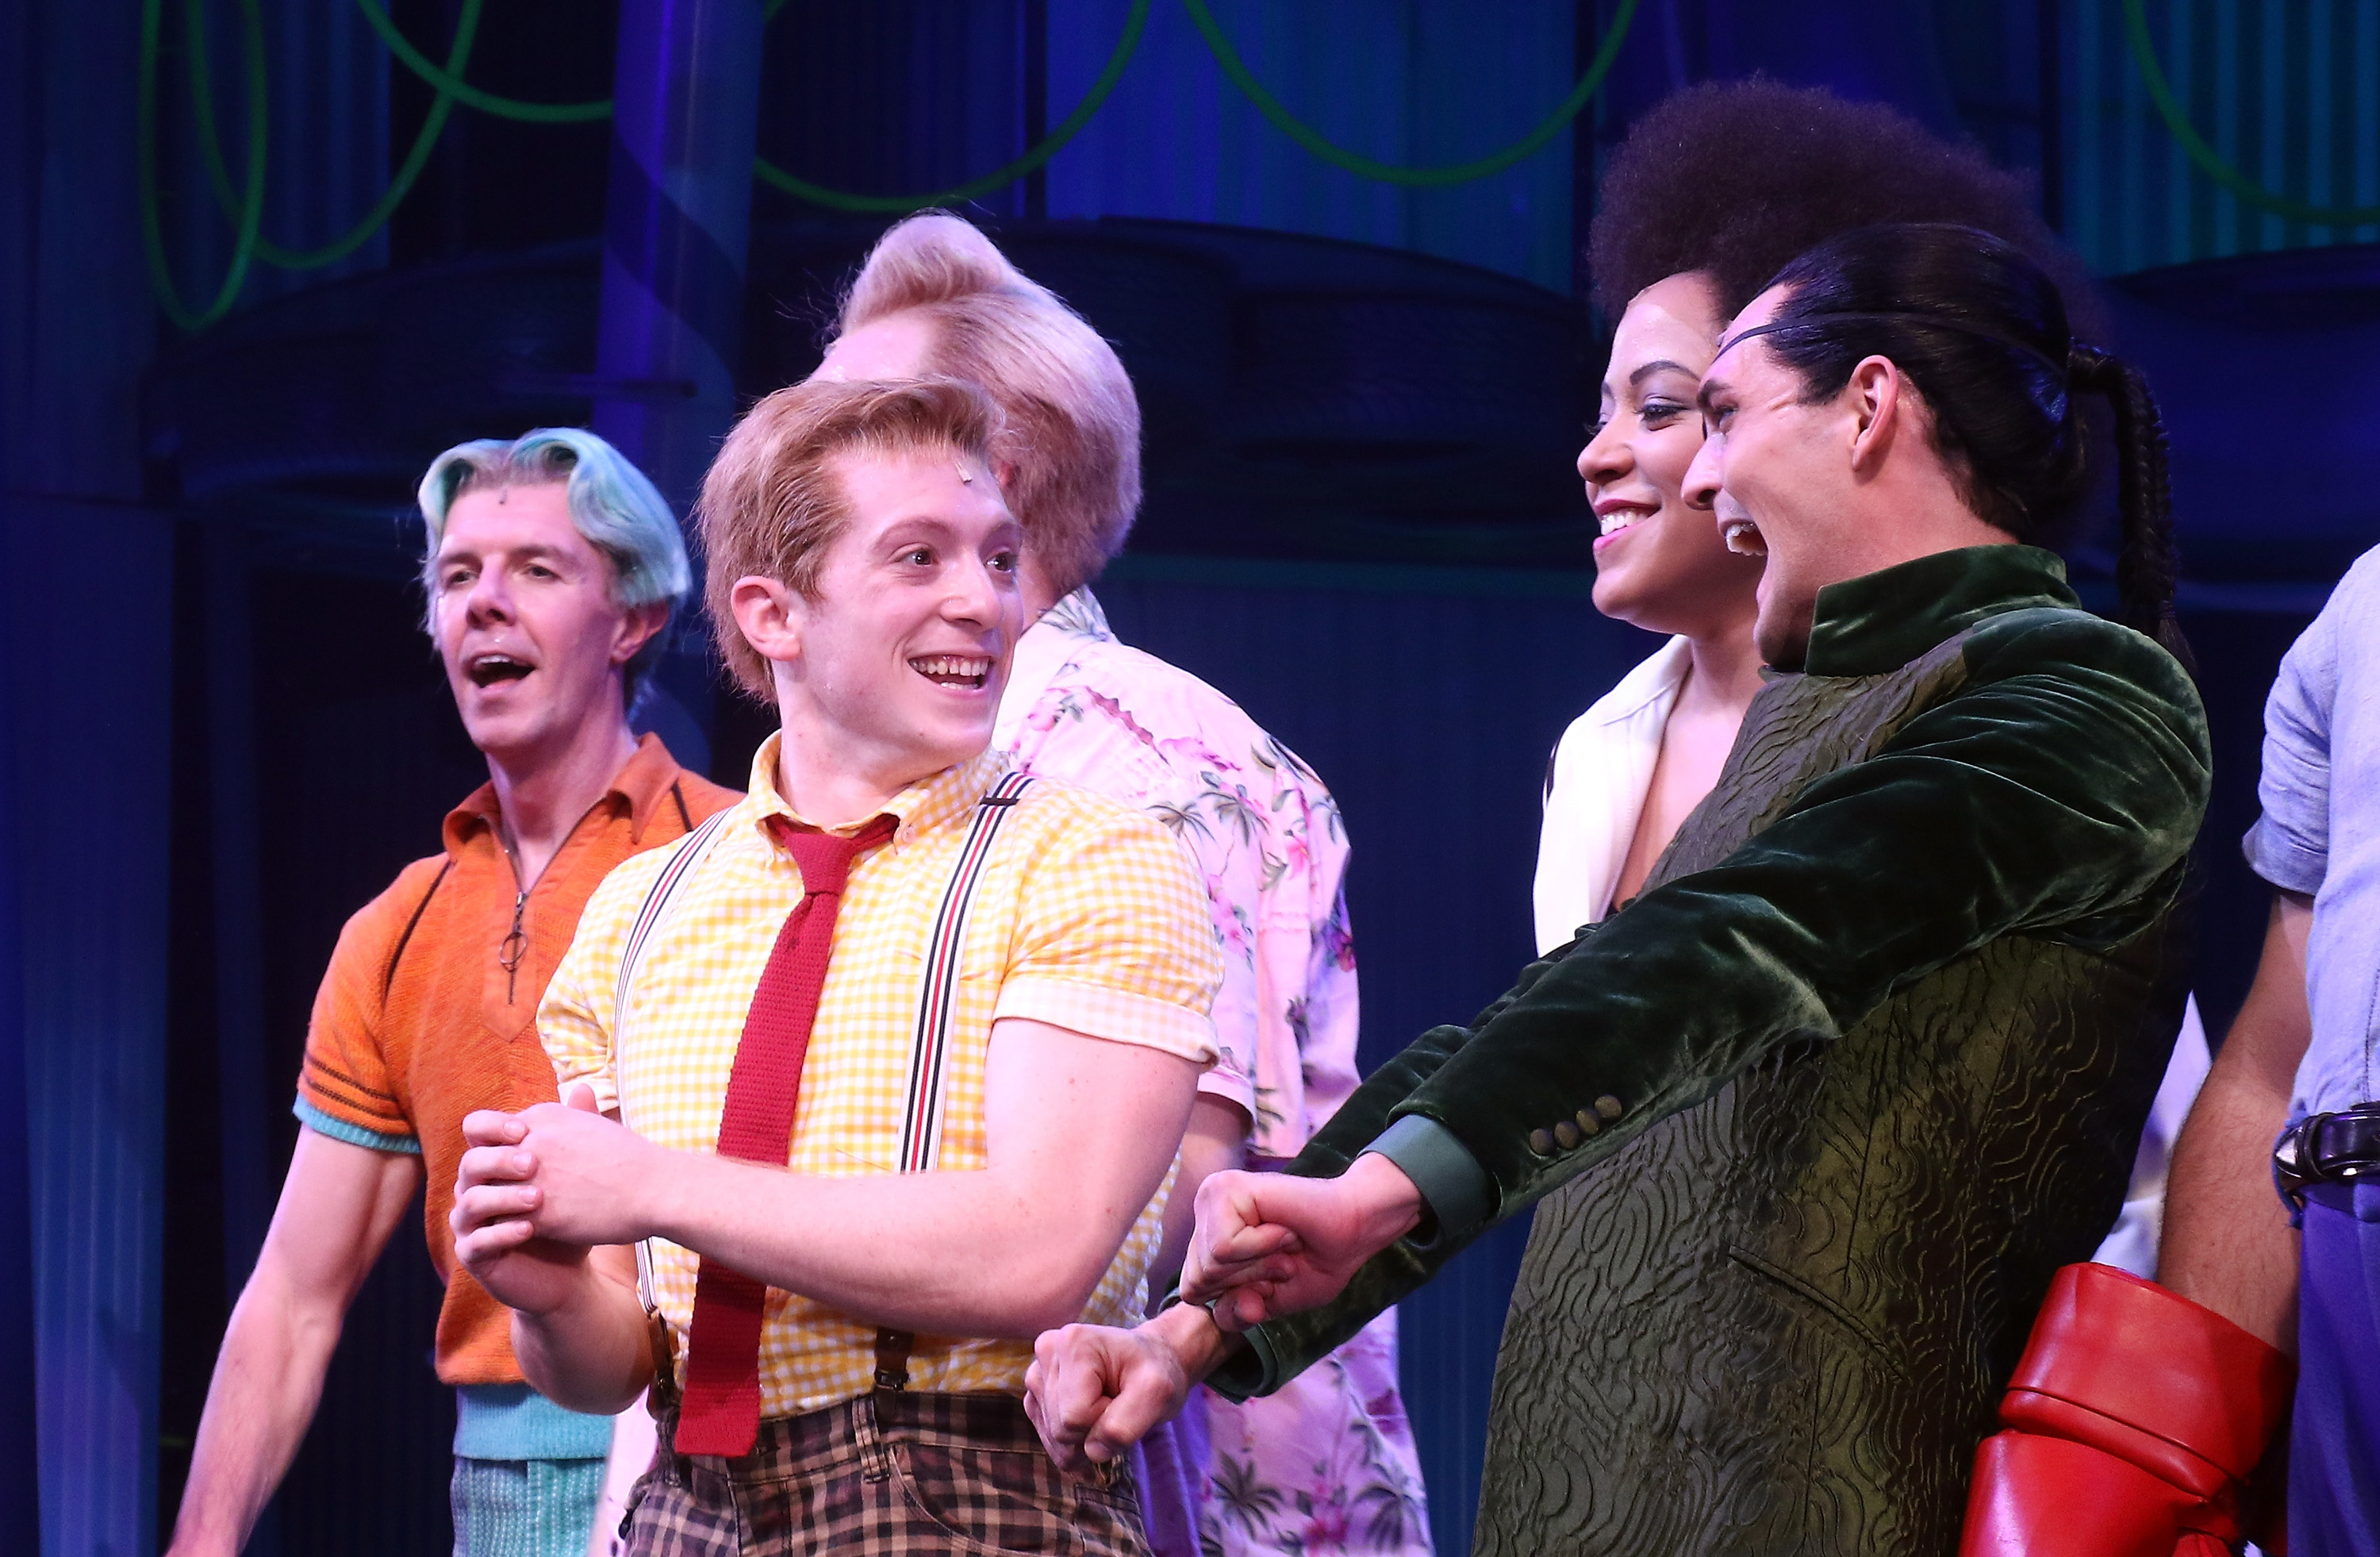 Ethan onstage with other SpongeBob cast members